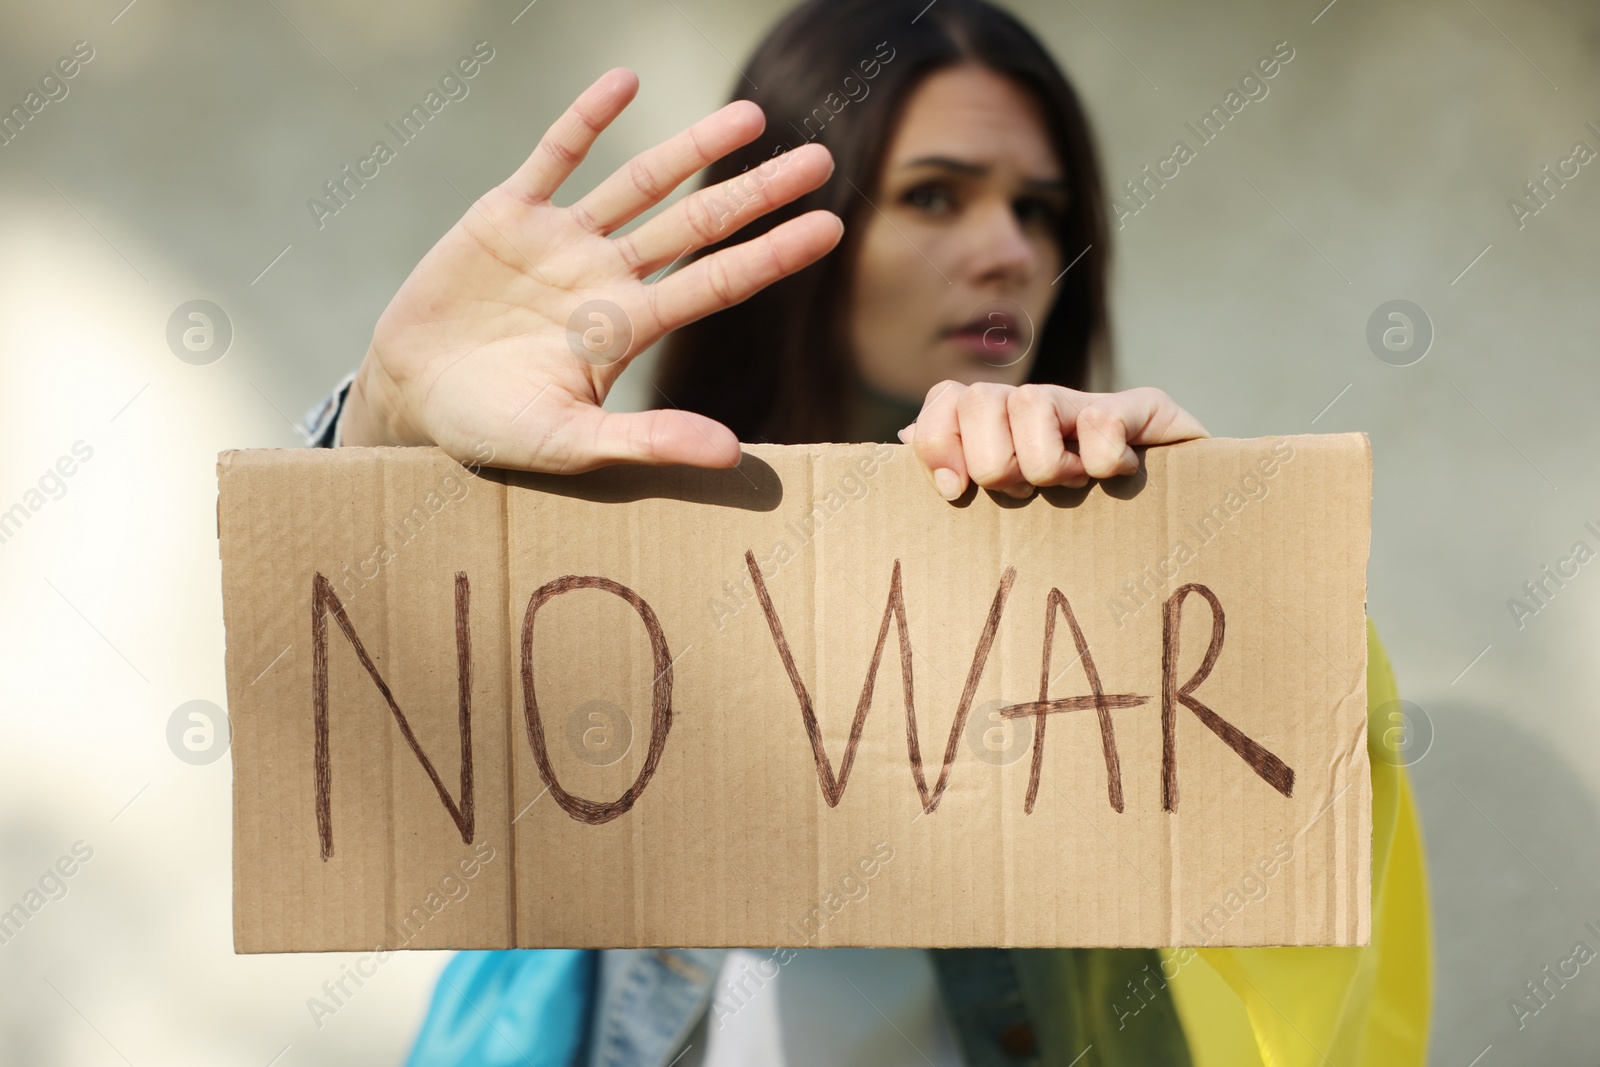 Photo of Sad woman holding poster with words No War and showing stop gesture near light wall, focus on hands